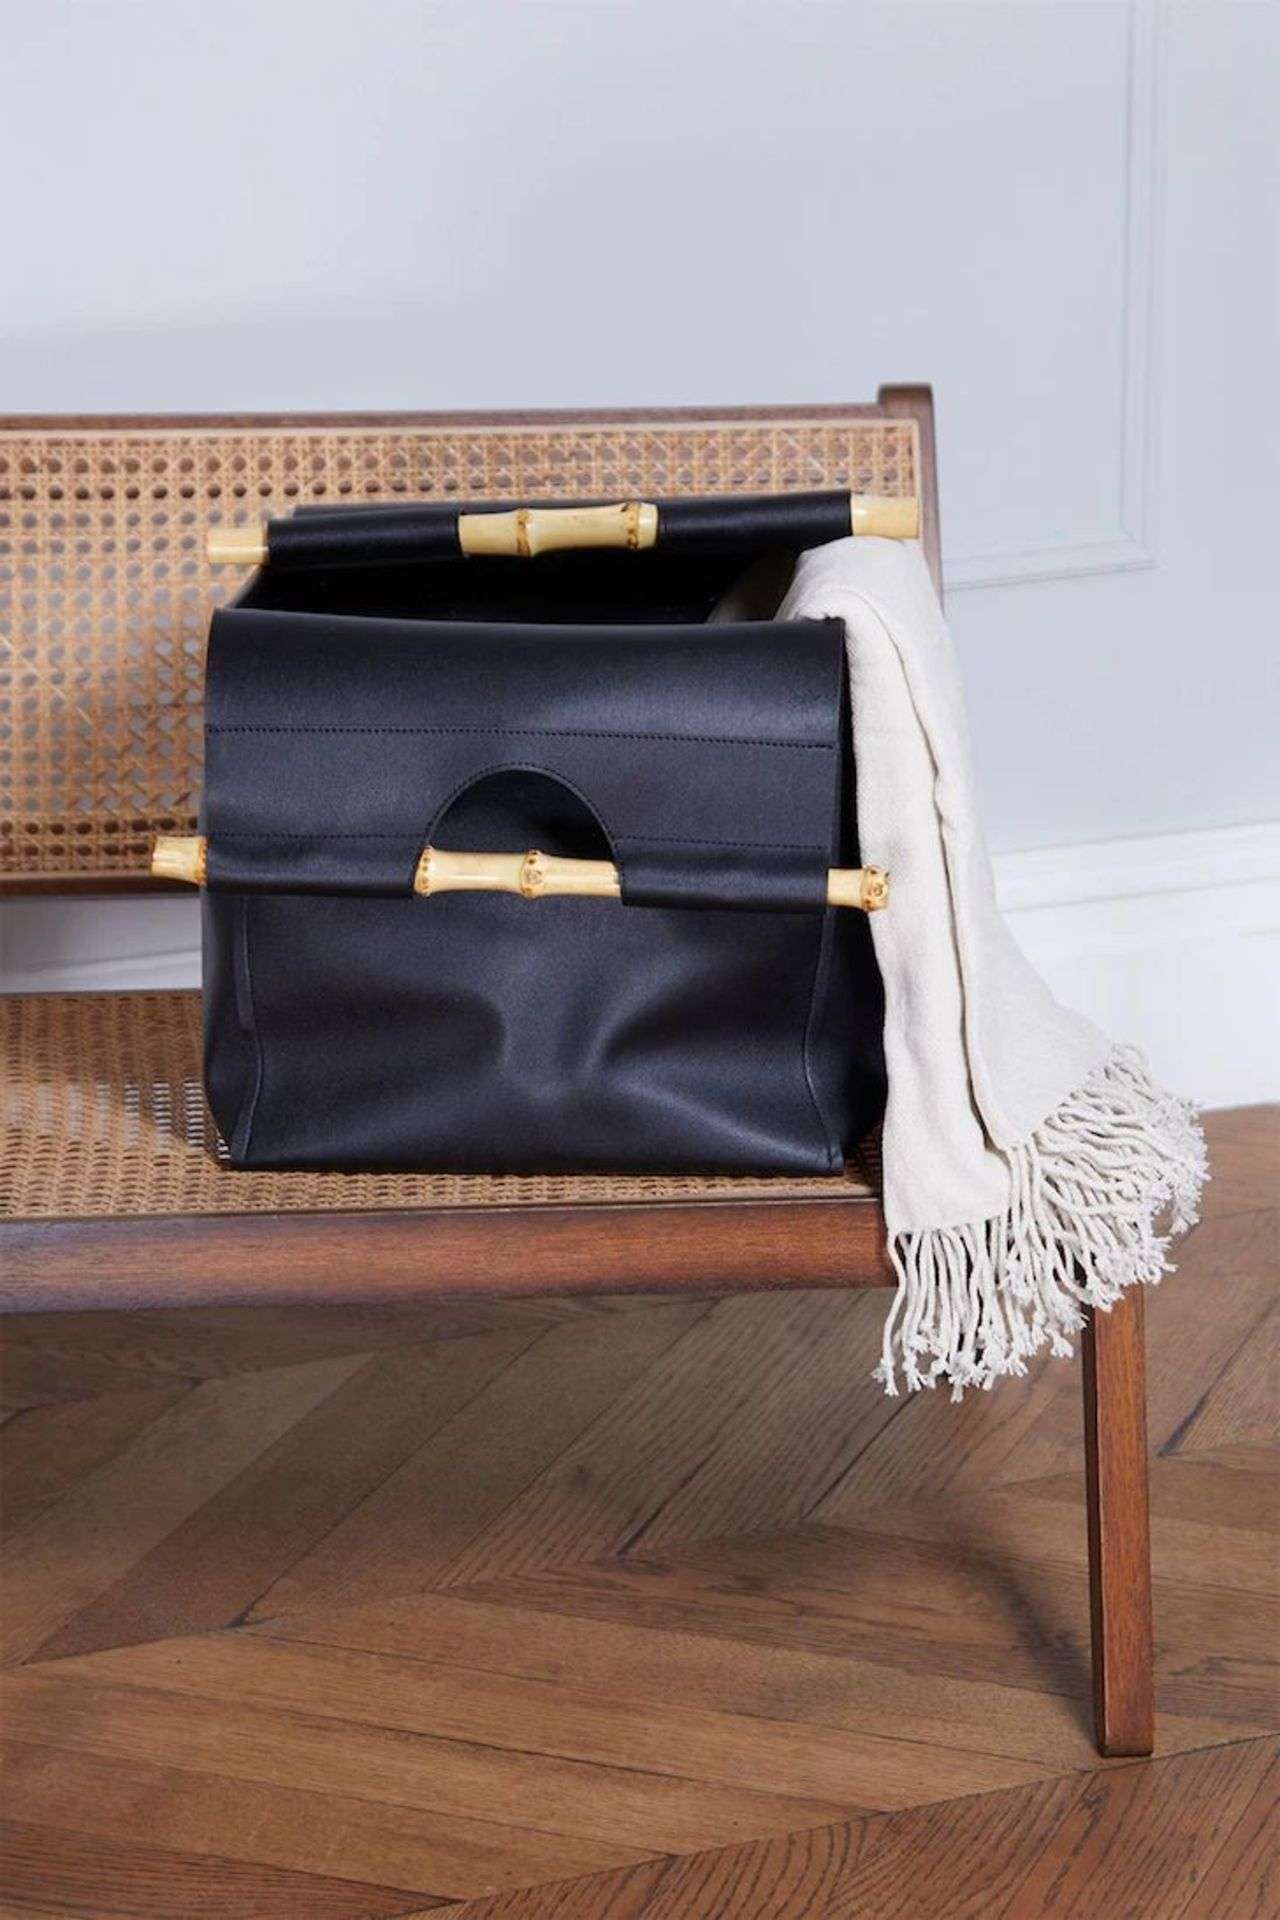 BRAND NEW Style Sisters PU Leather Storage with Bamboo Handles Black RRP £70 EACH DB (953930)